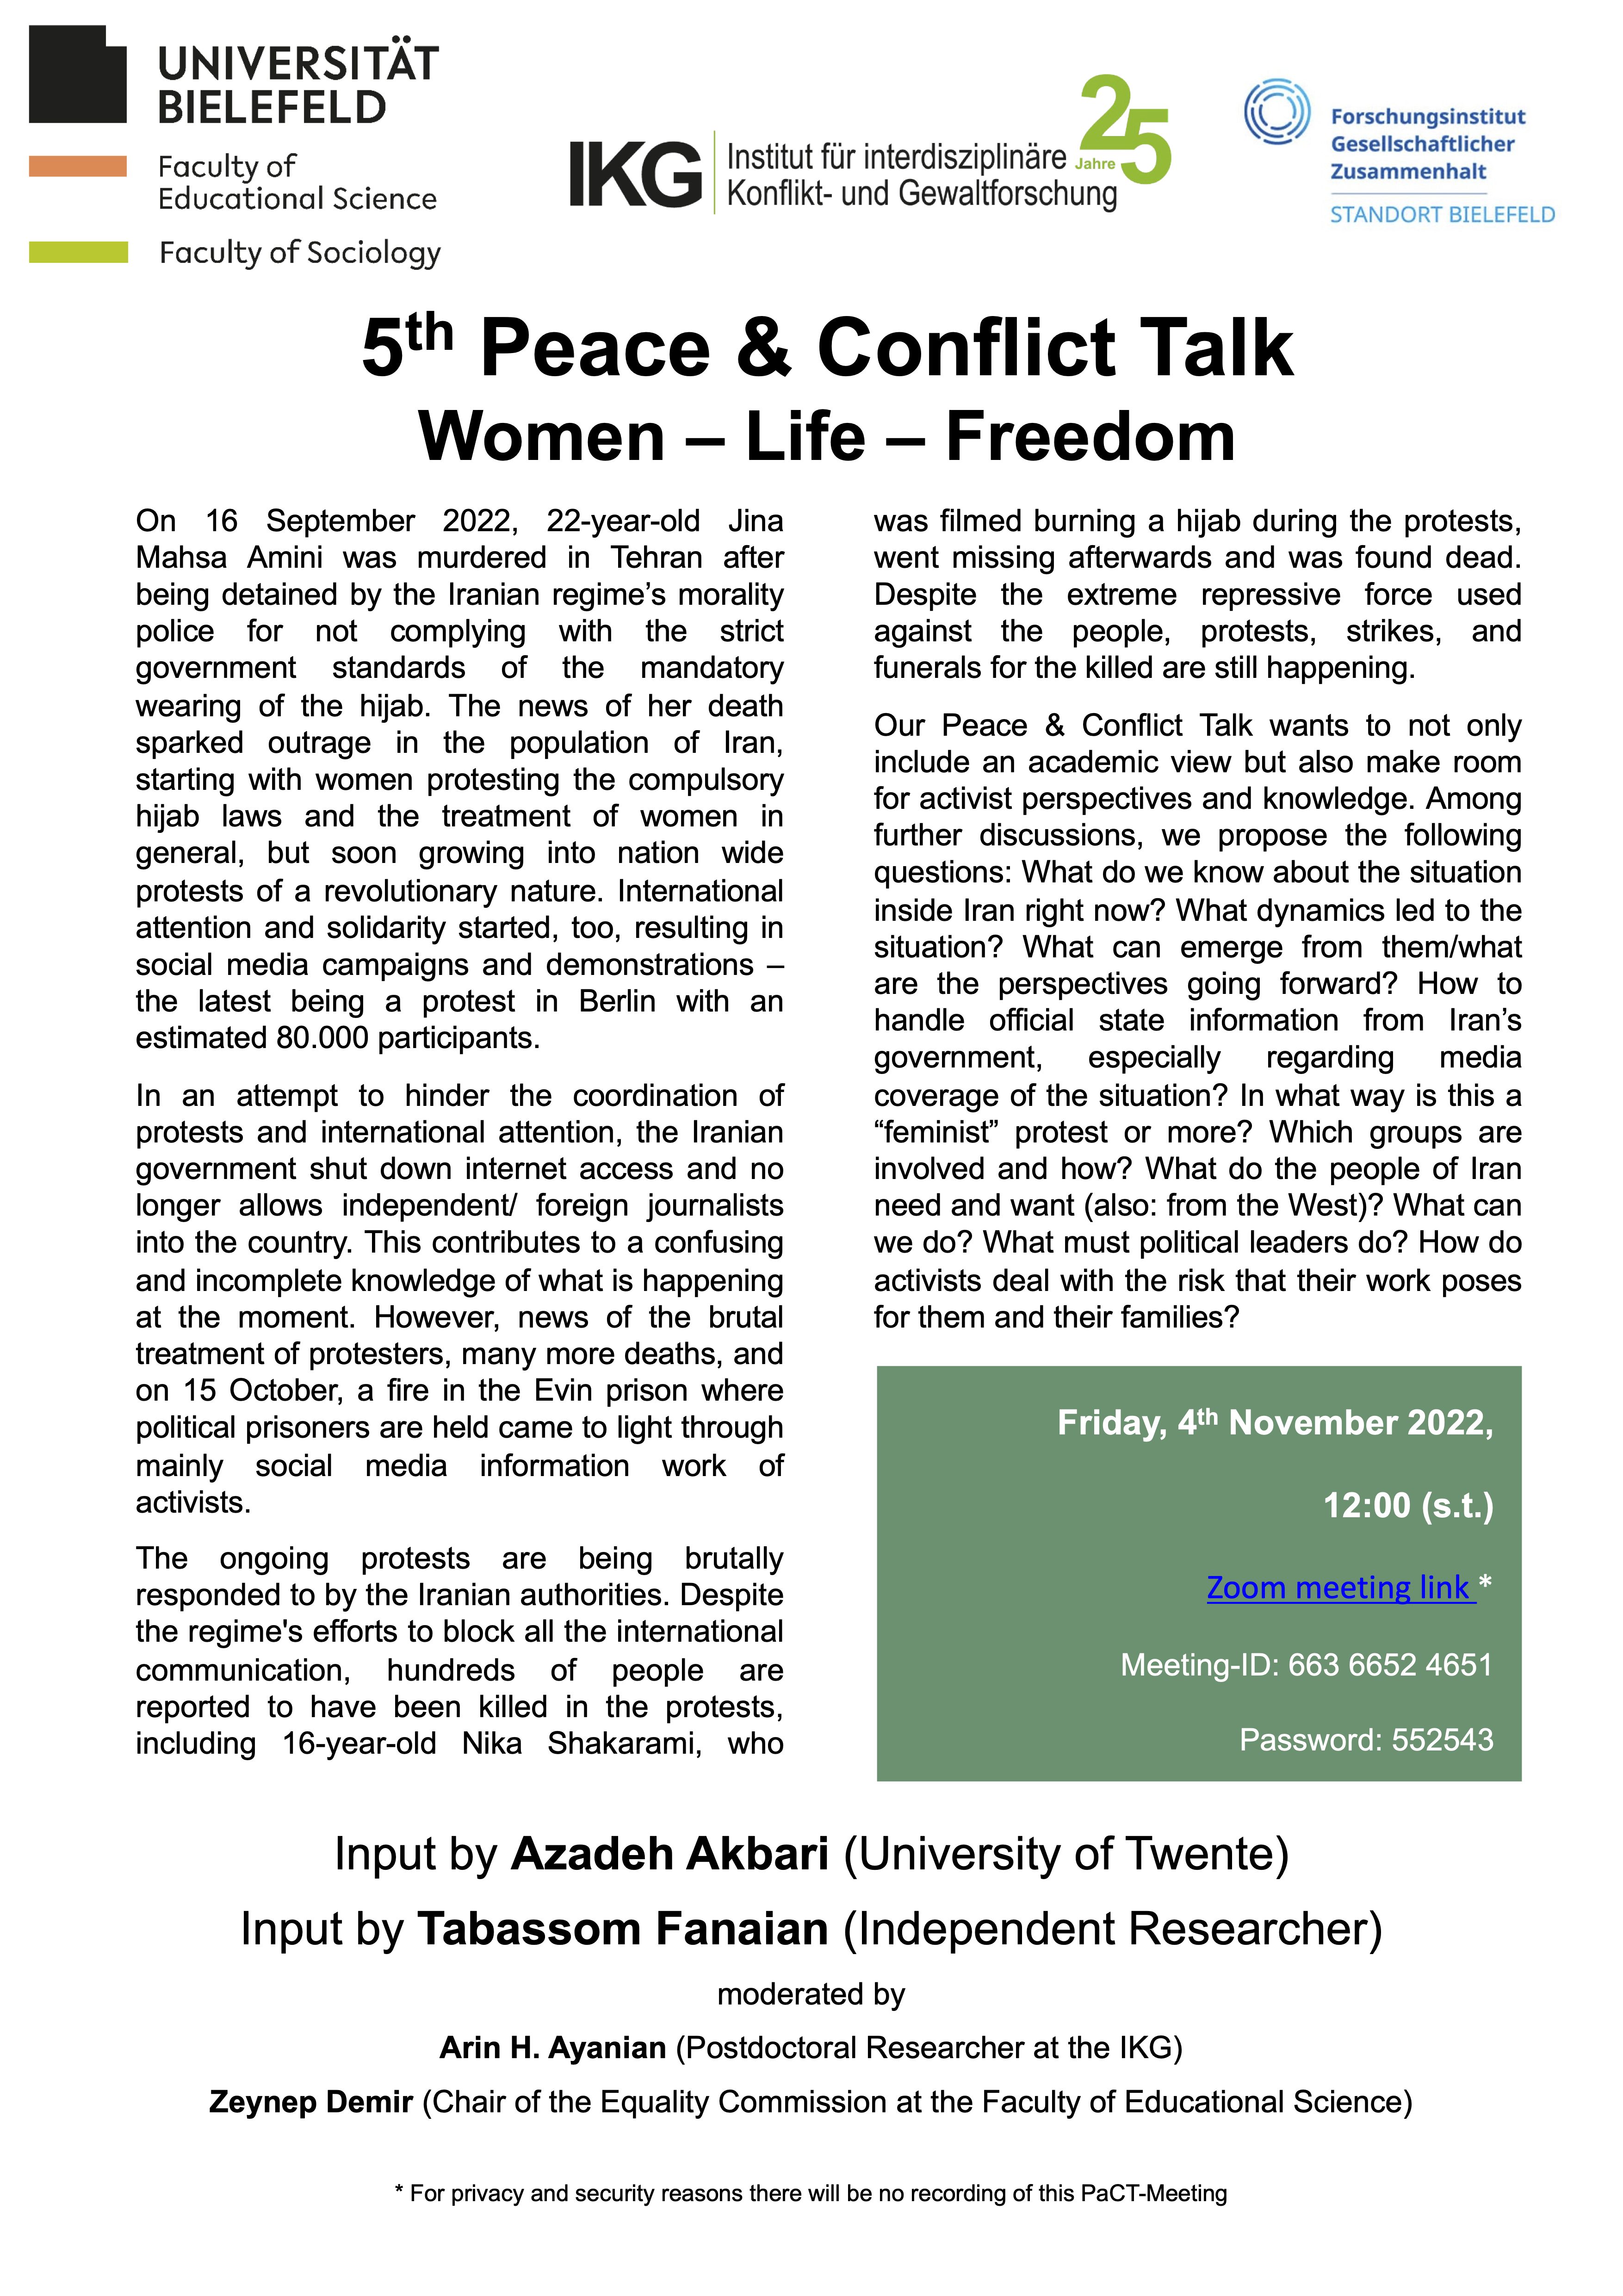 Women – Life – Freedom. 5th Peace & Conflict Talk